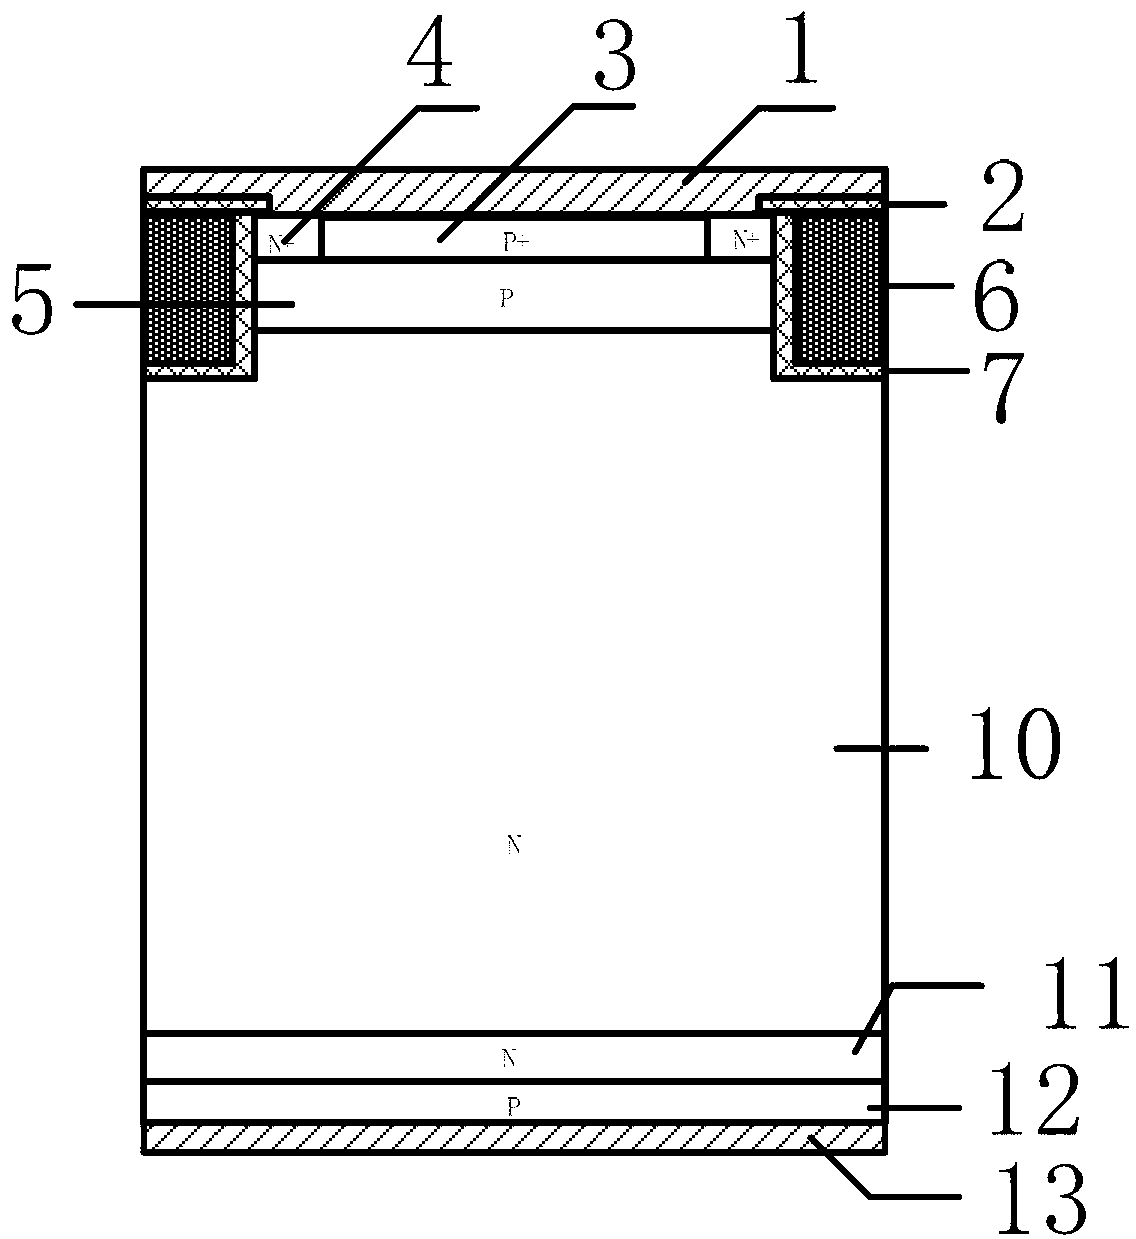 Insulated-gate bipolar transistor with embedded island structure